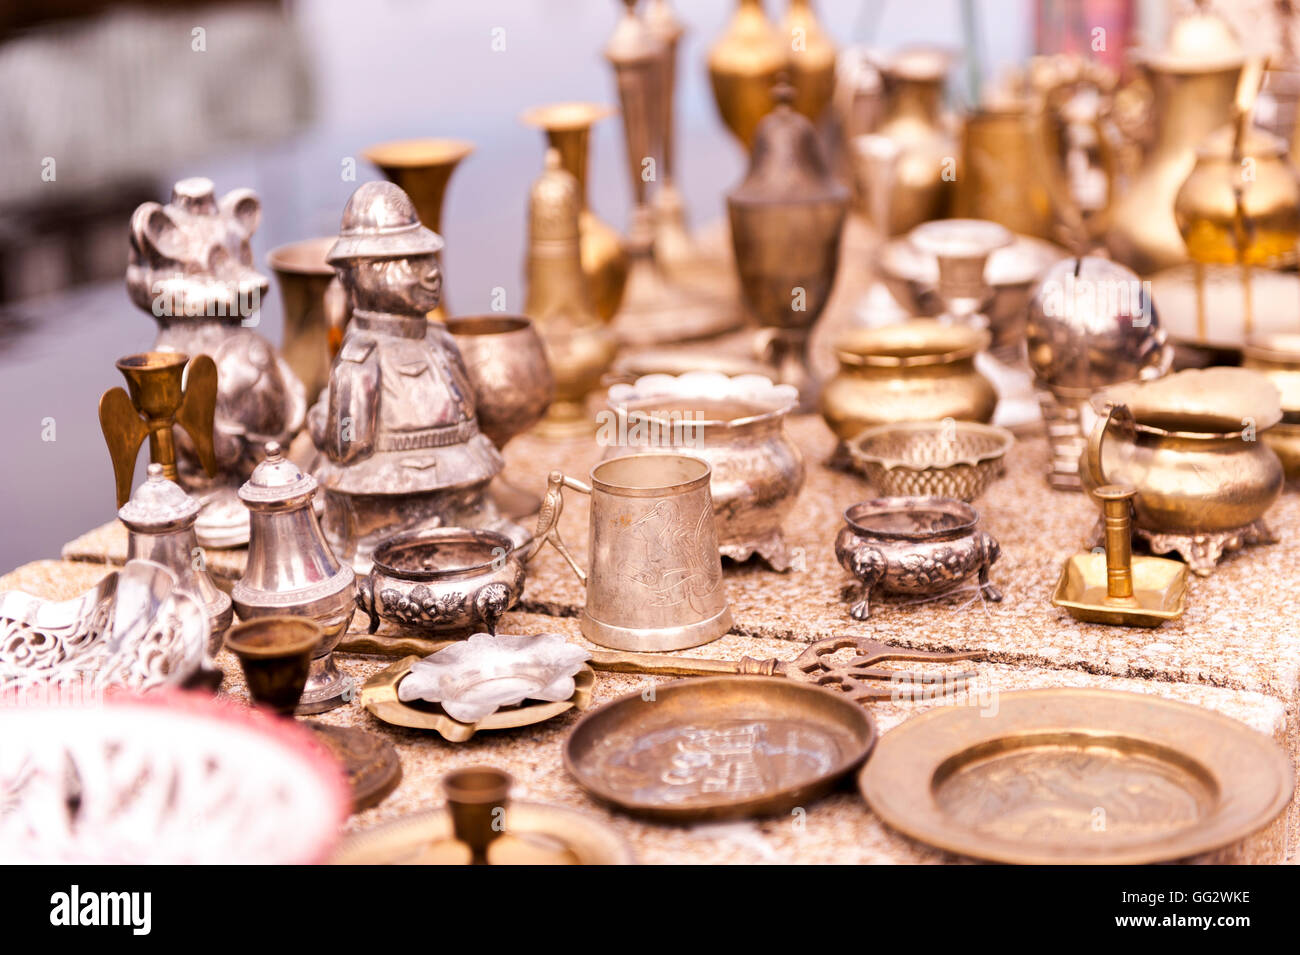 A market stall full of various brass and pewter products for sale. Stock Photo